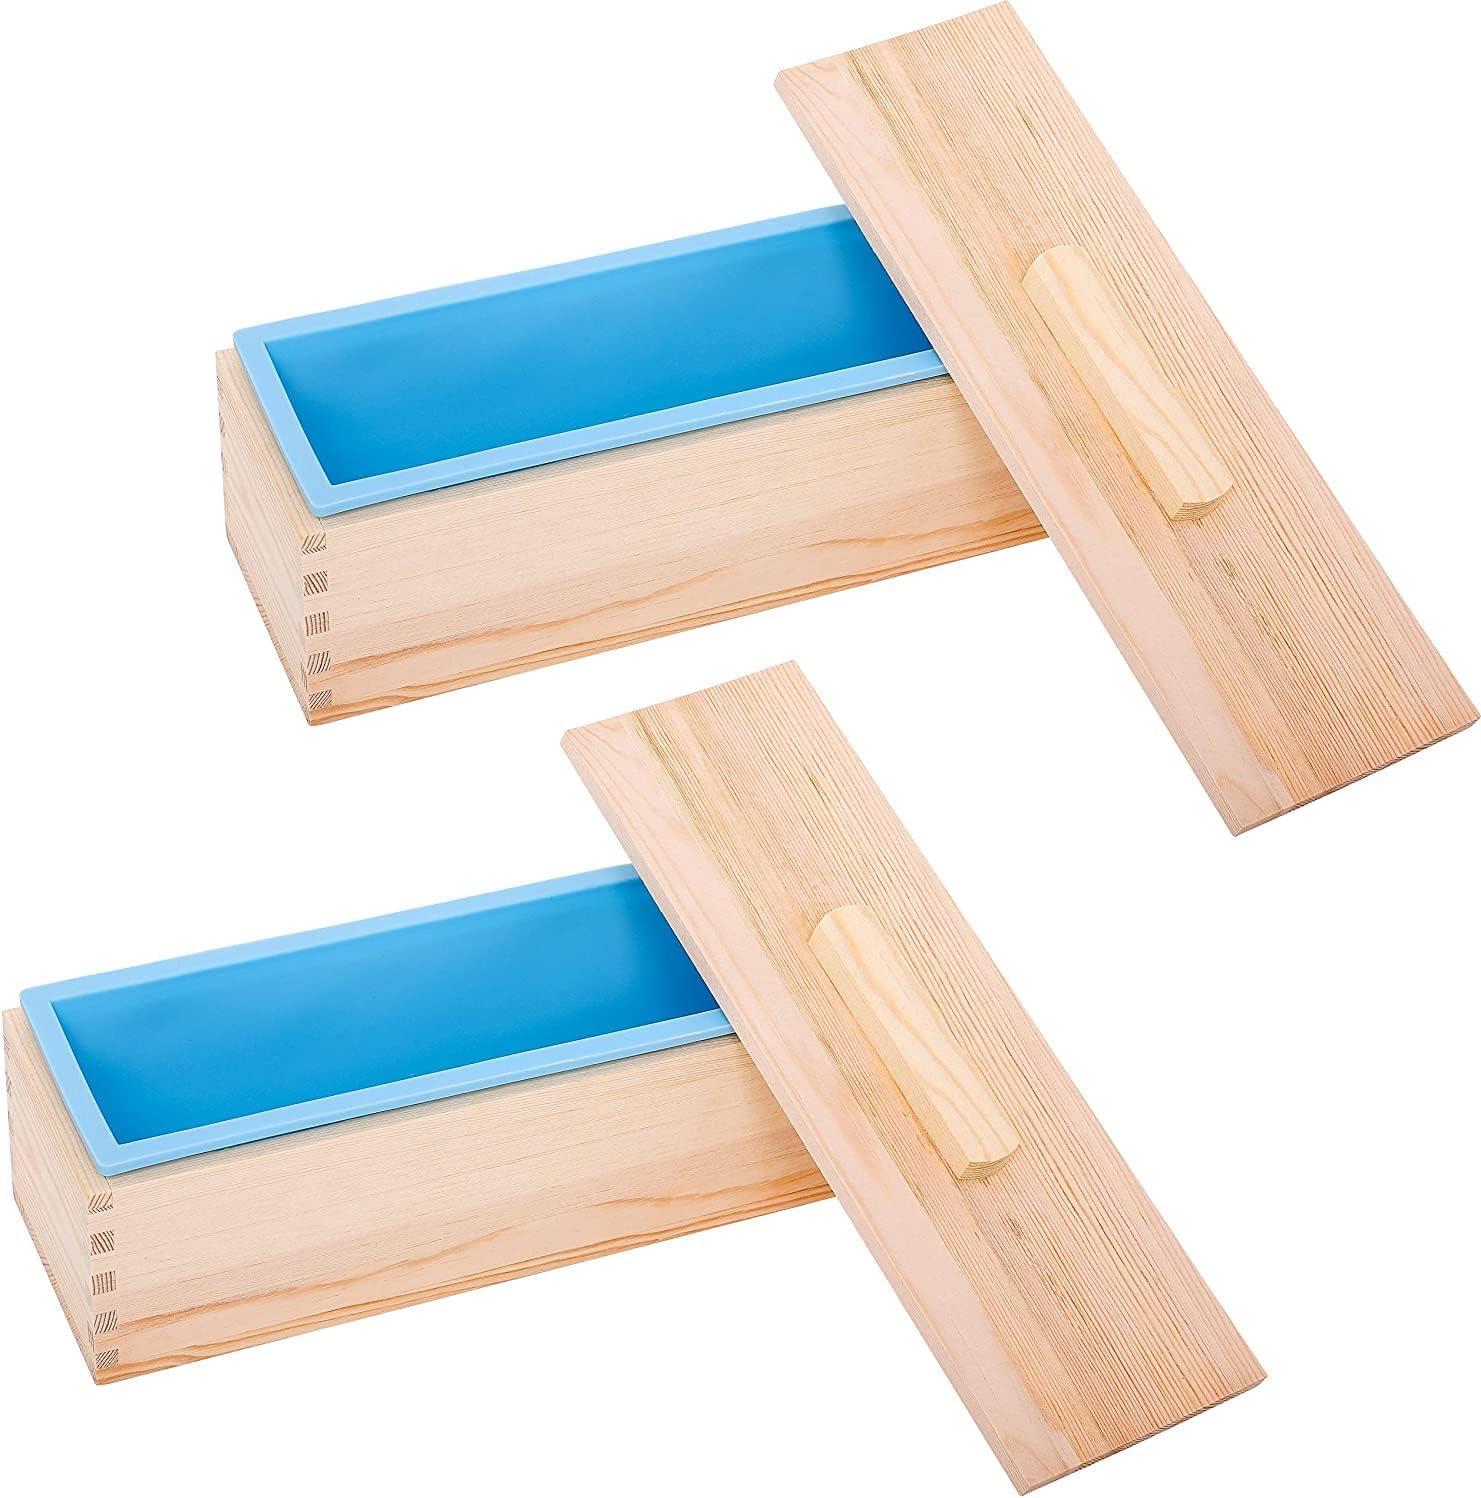 Flexible Rectangular Silicone Soap Loaf Mold with Wood Box